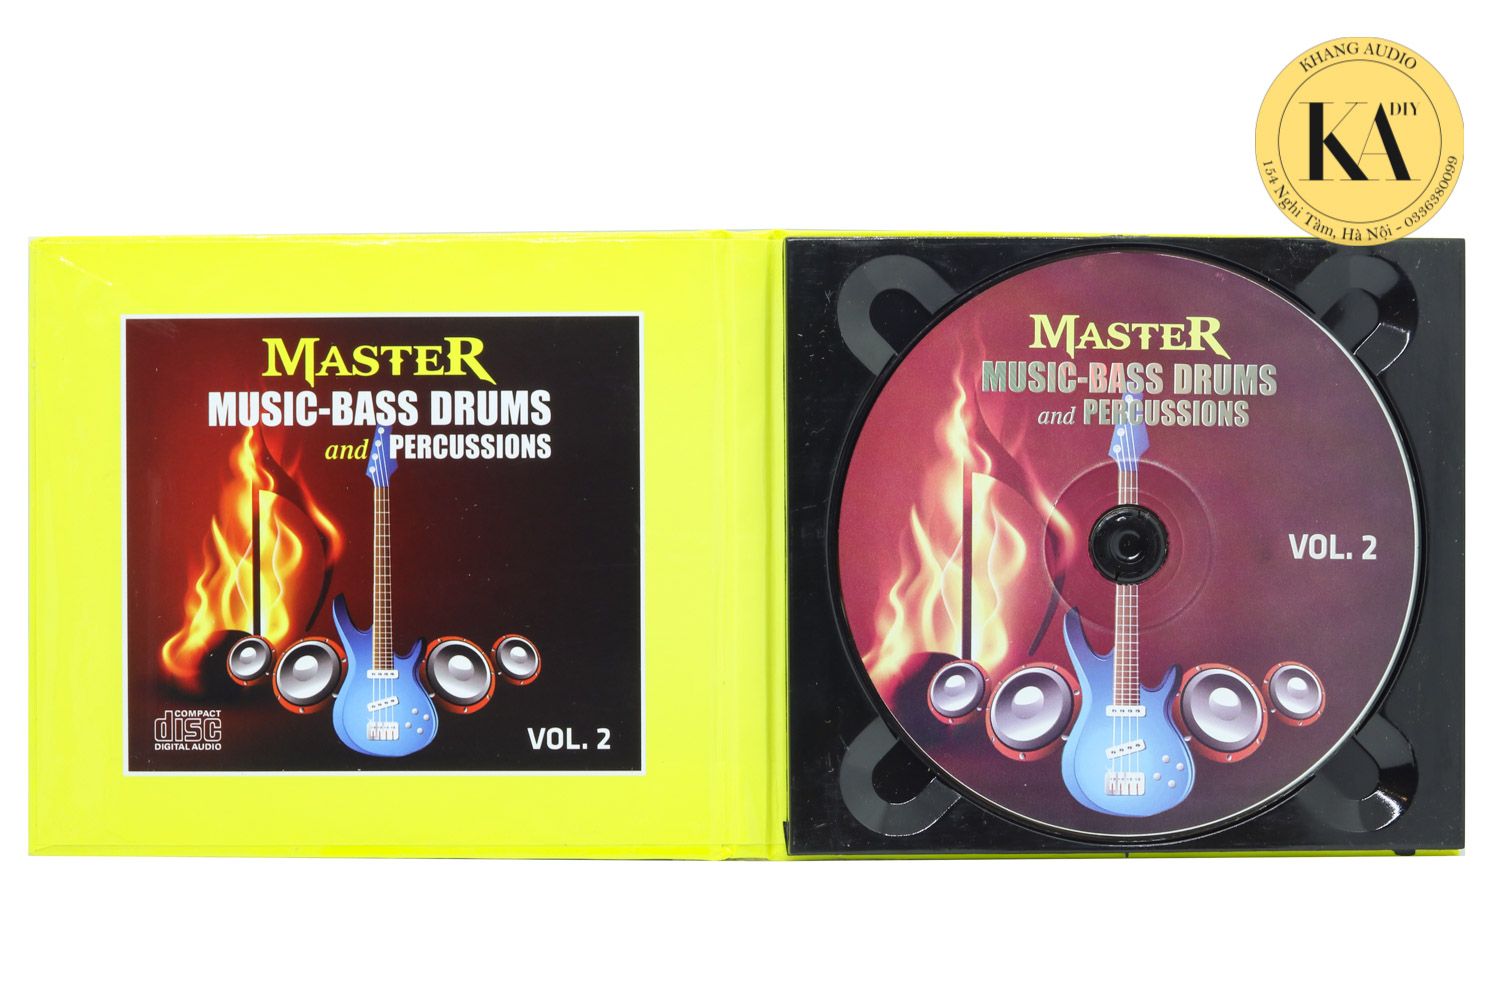 Master Music - Bass Drums and Percussions Vol.2 Khang Audio 0336380099